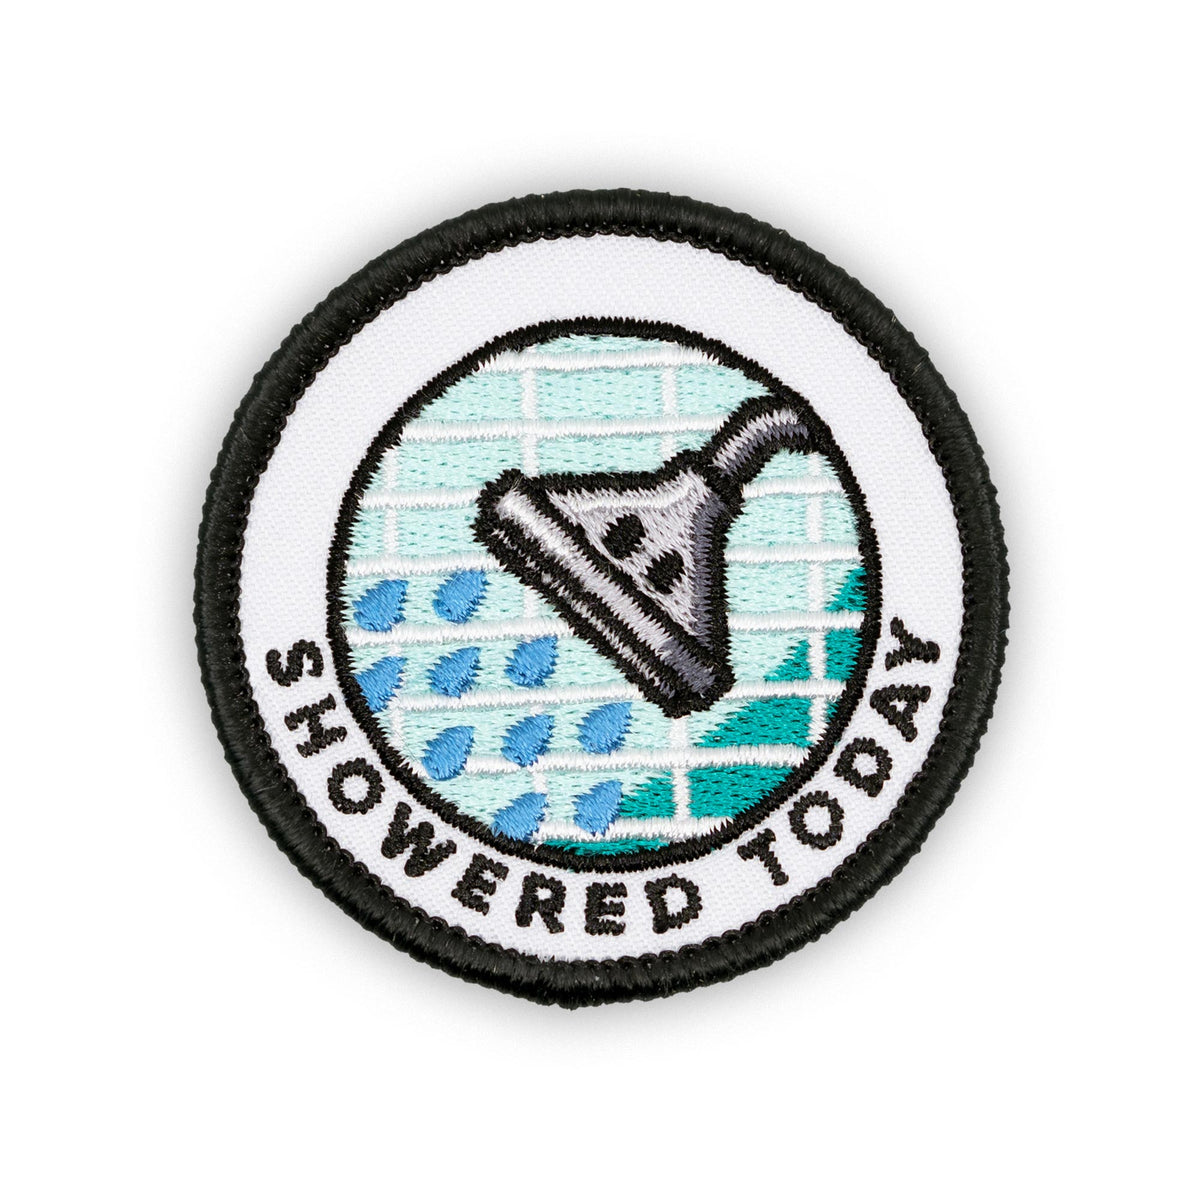 Showered Today adulting merit badge patch for adults